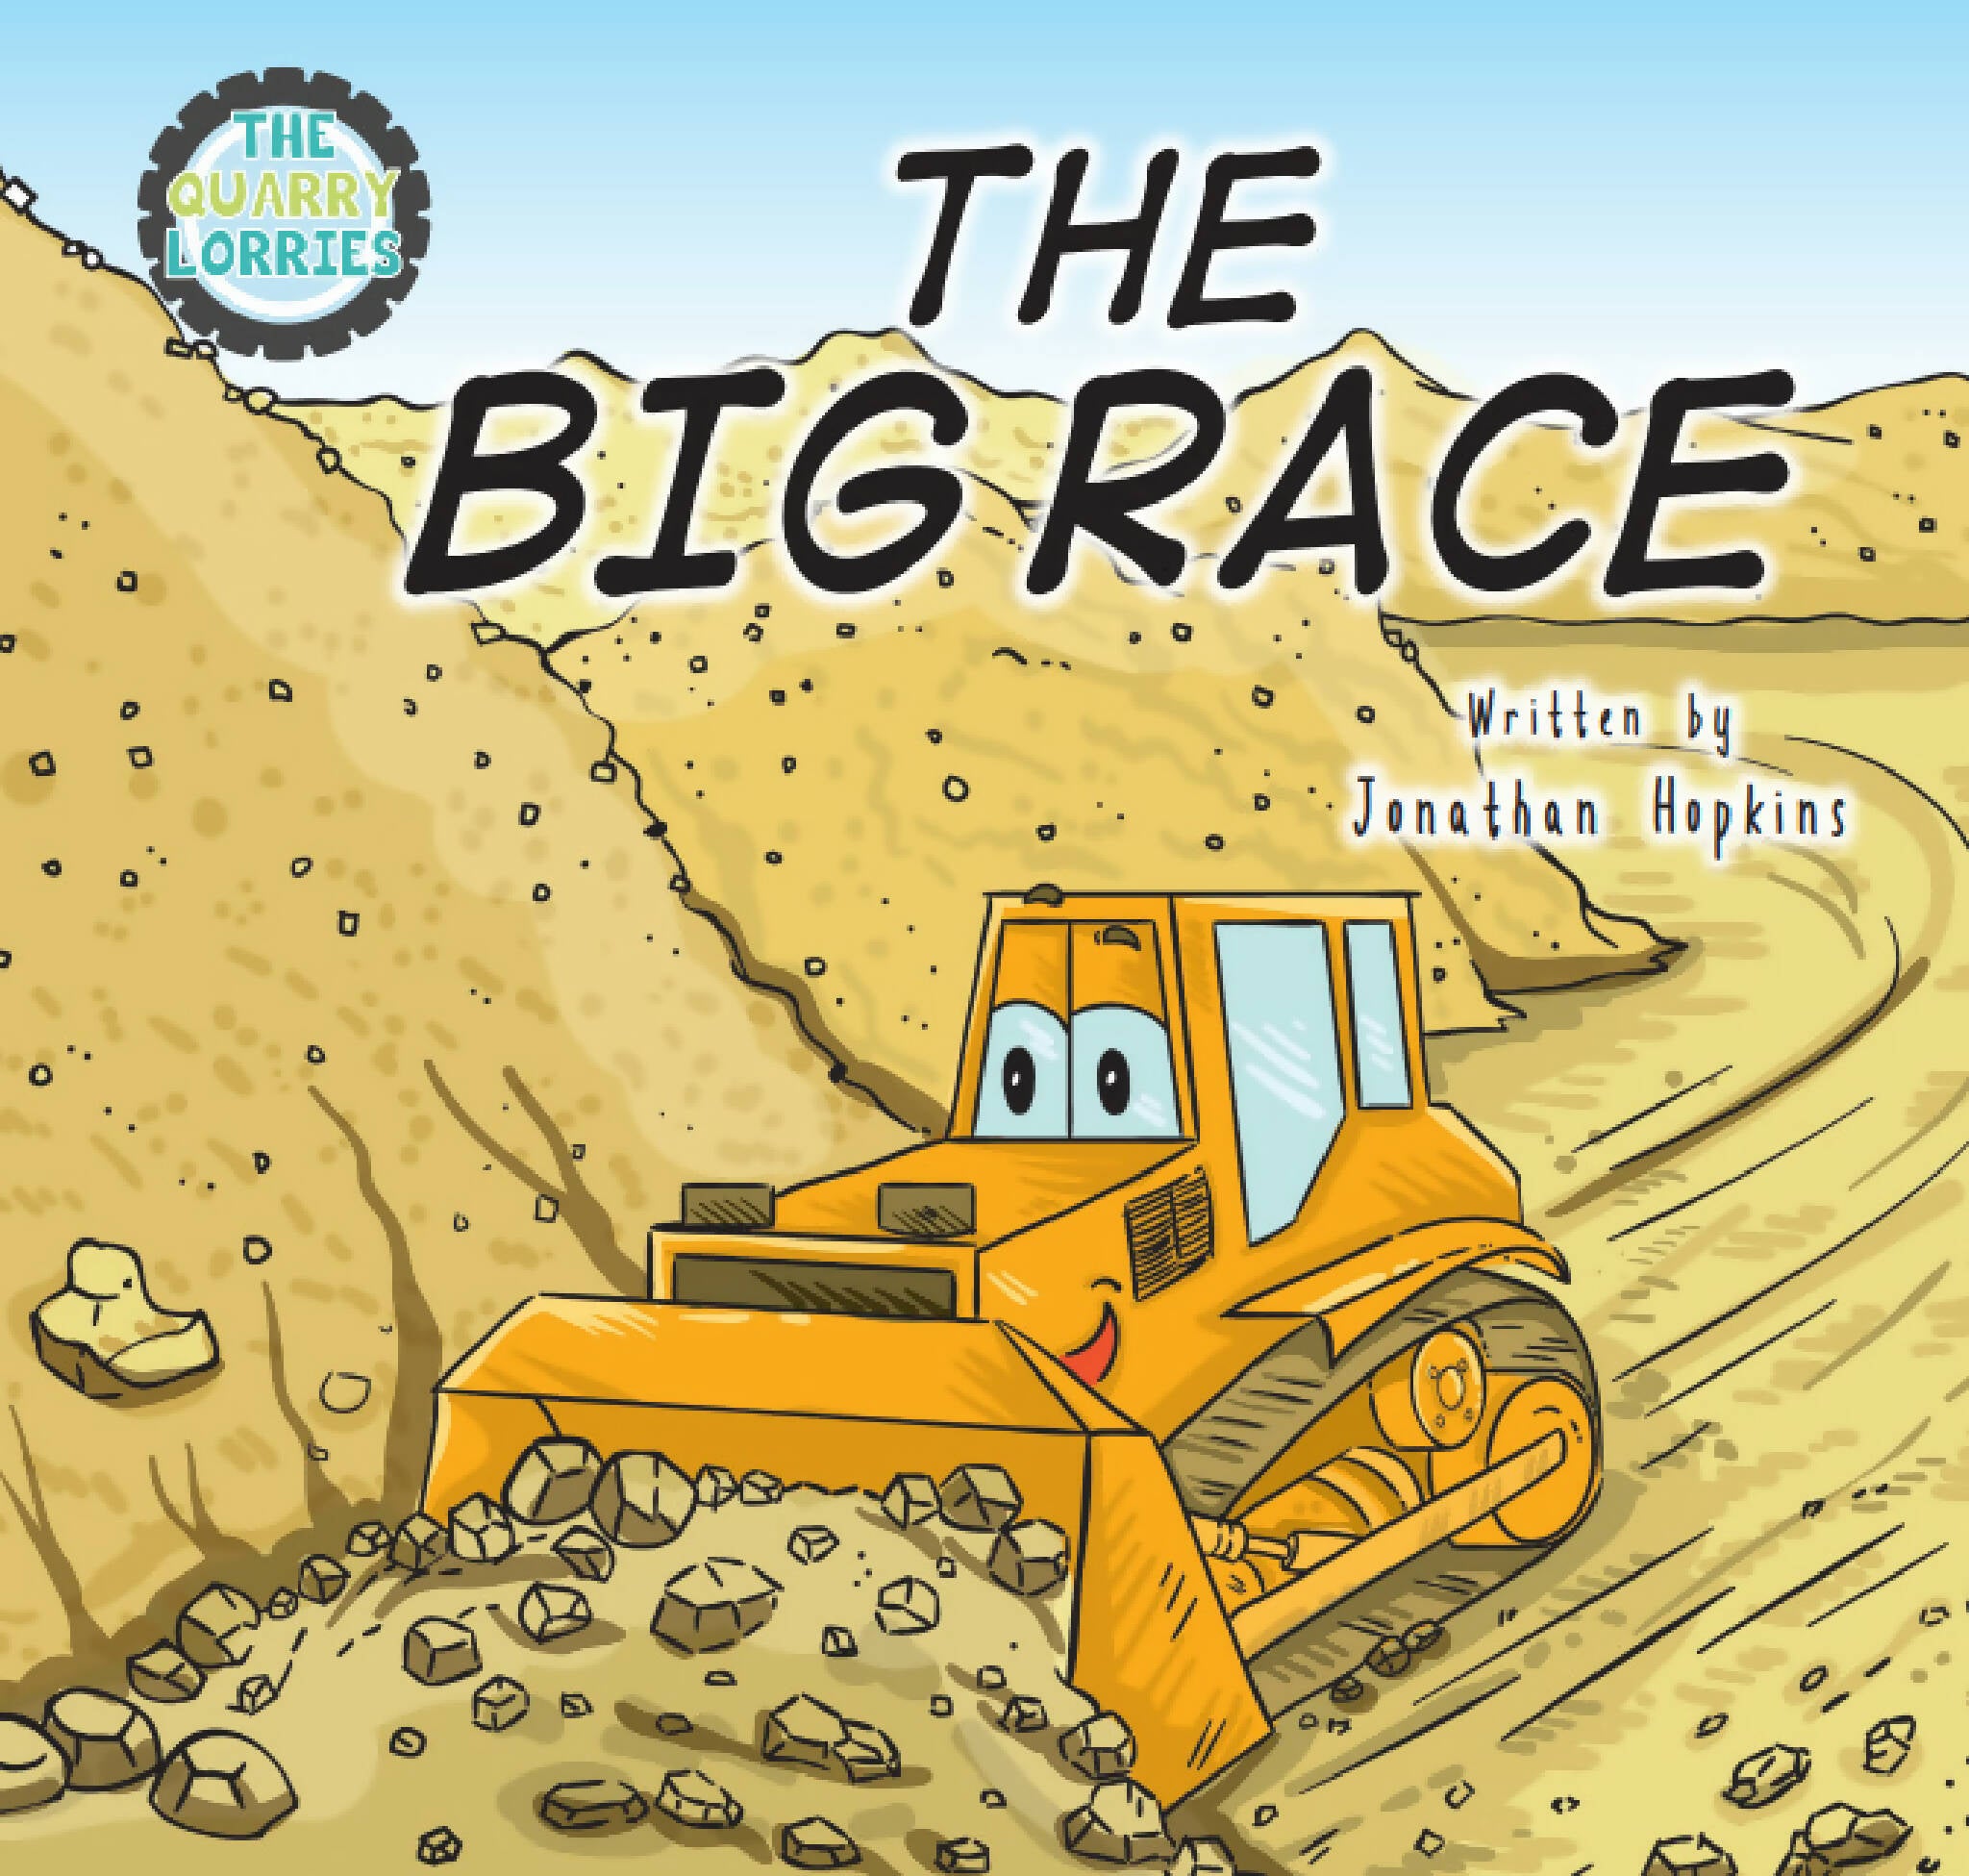 The Quarry Lorries: The Big Race